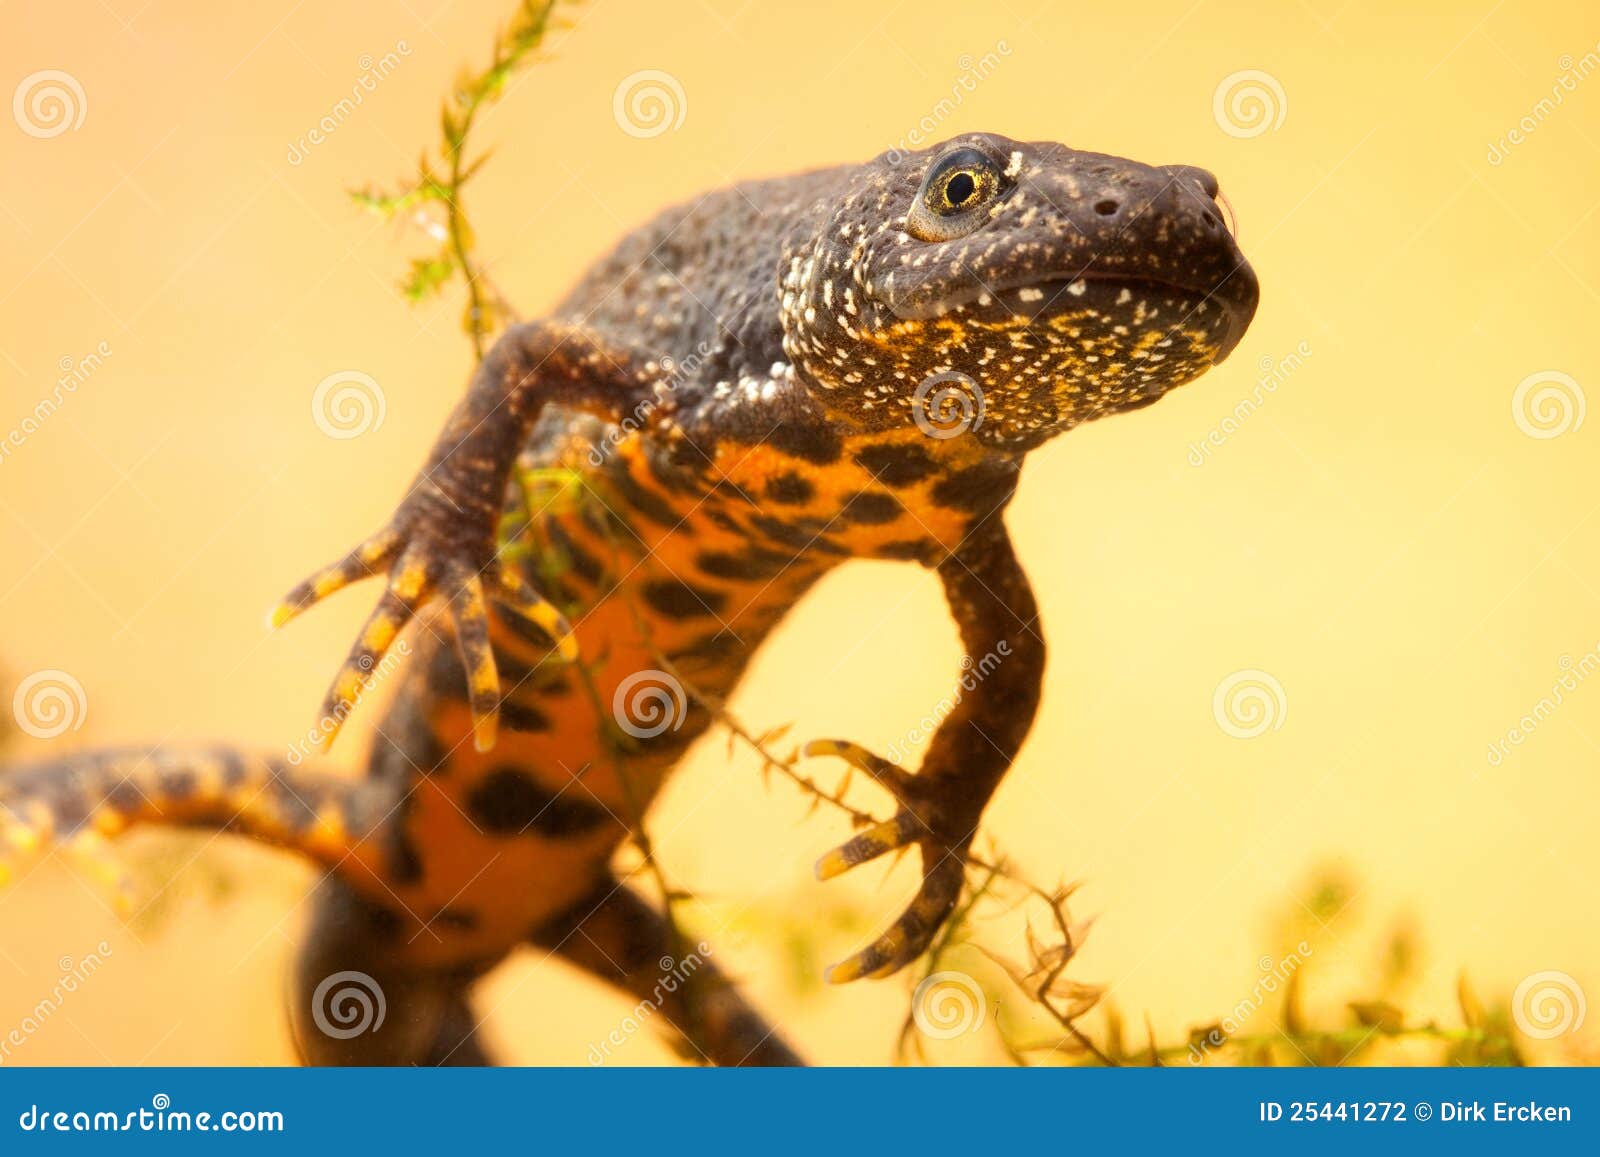 great crested newt or water dragon